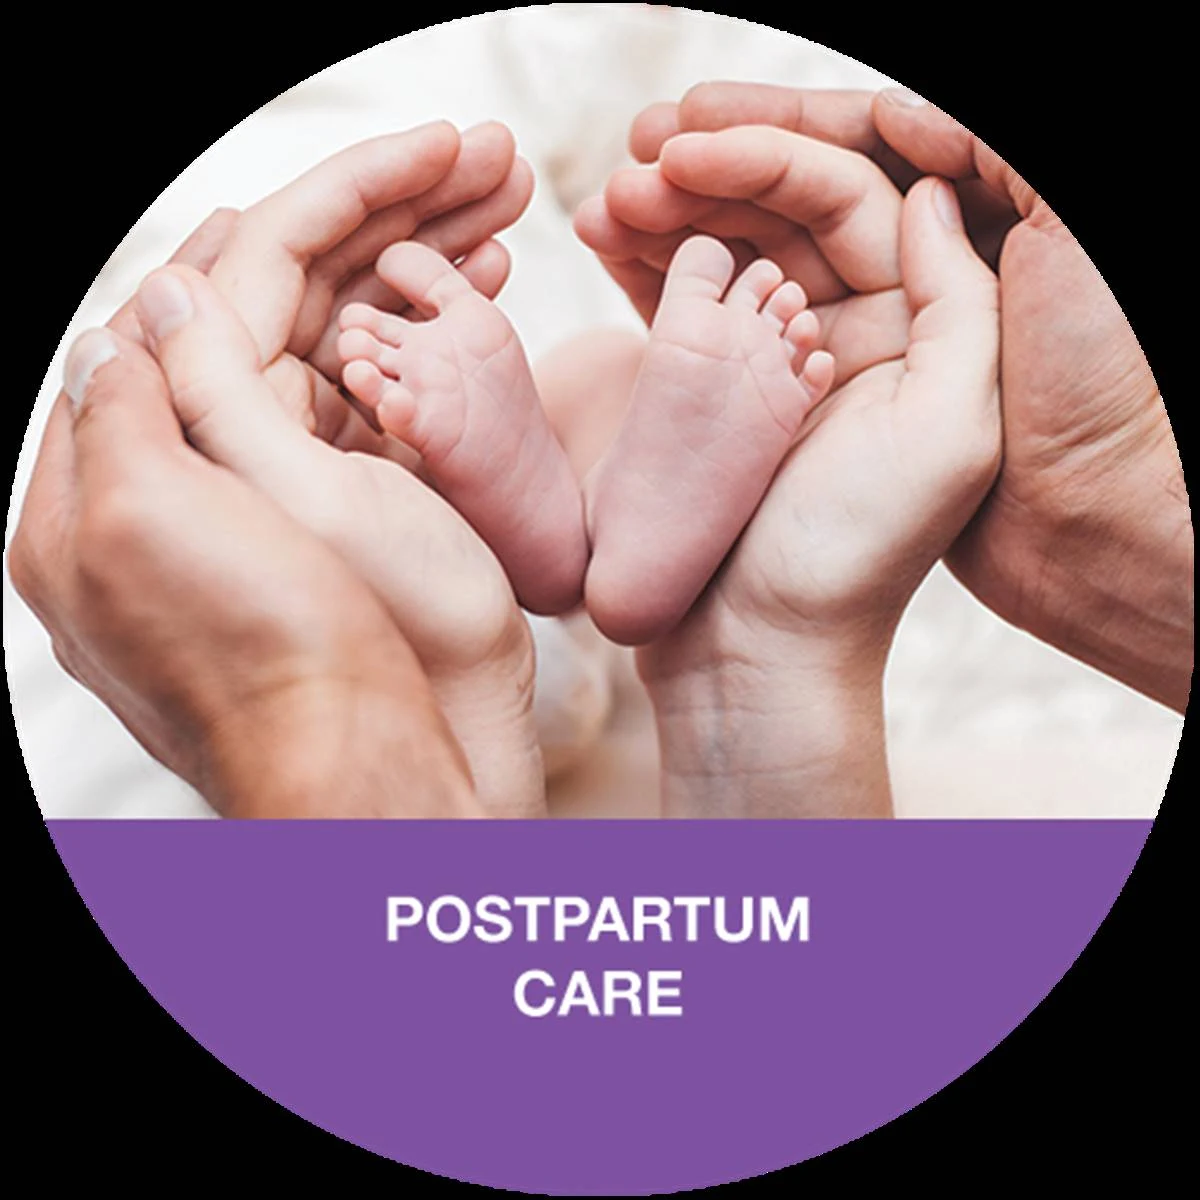 What is the postpartum period?